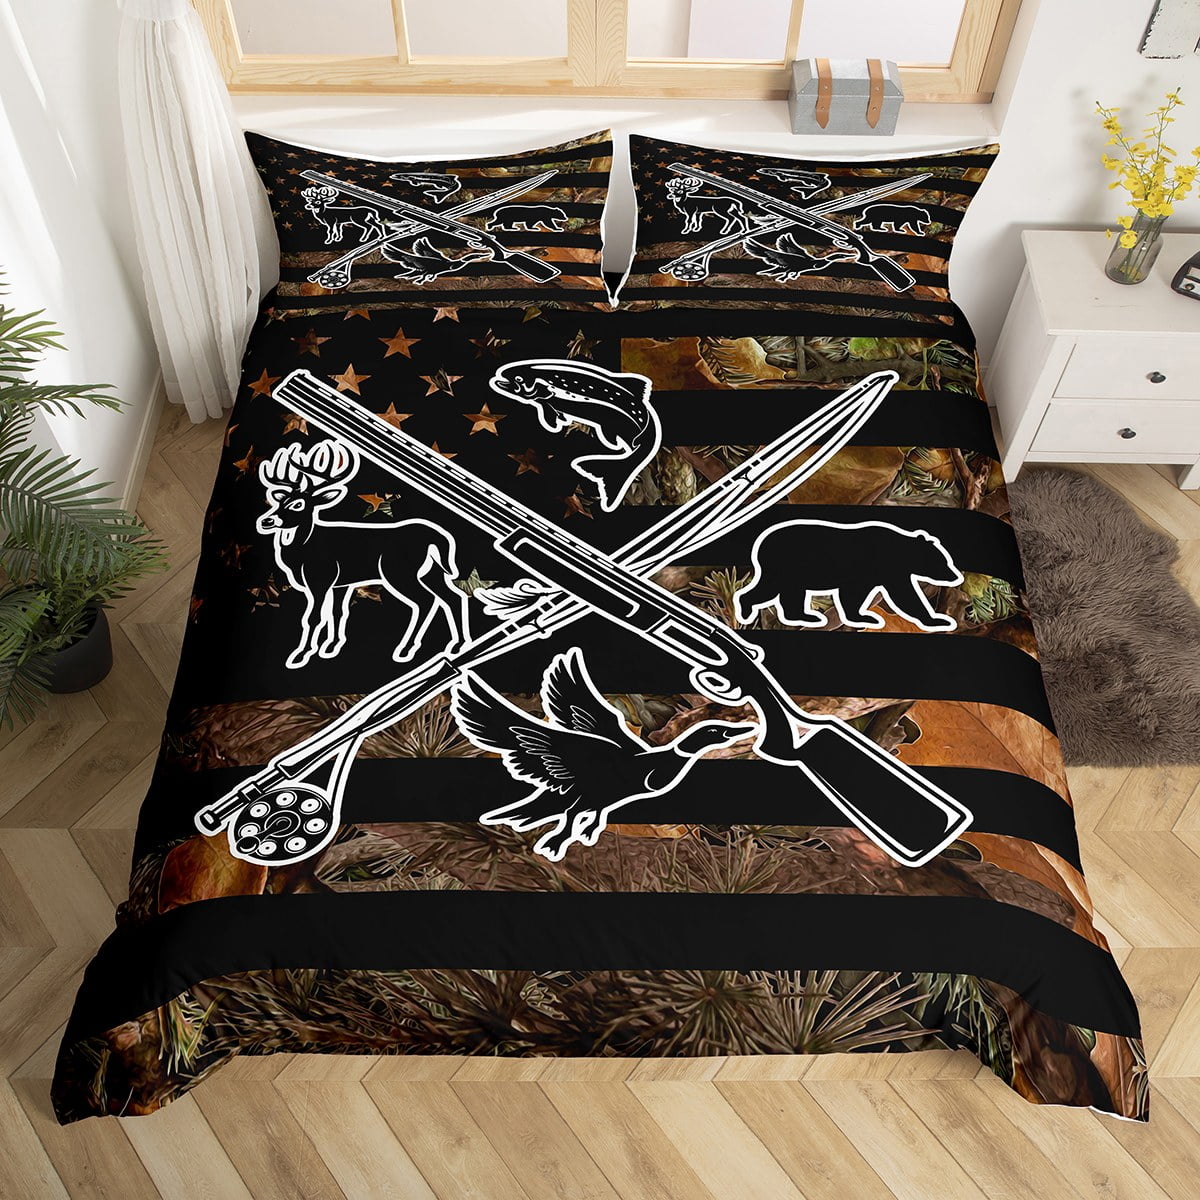 Hunting And Fishing Duvet Cover Wildlife Fish Duck Deer Bear Twin Bedding  Sets For Boys Men,Camo American Flag Comforter Cover Rustic Trees Leaves  Camouflage Bed Set With 1 Pillow Case 